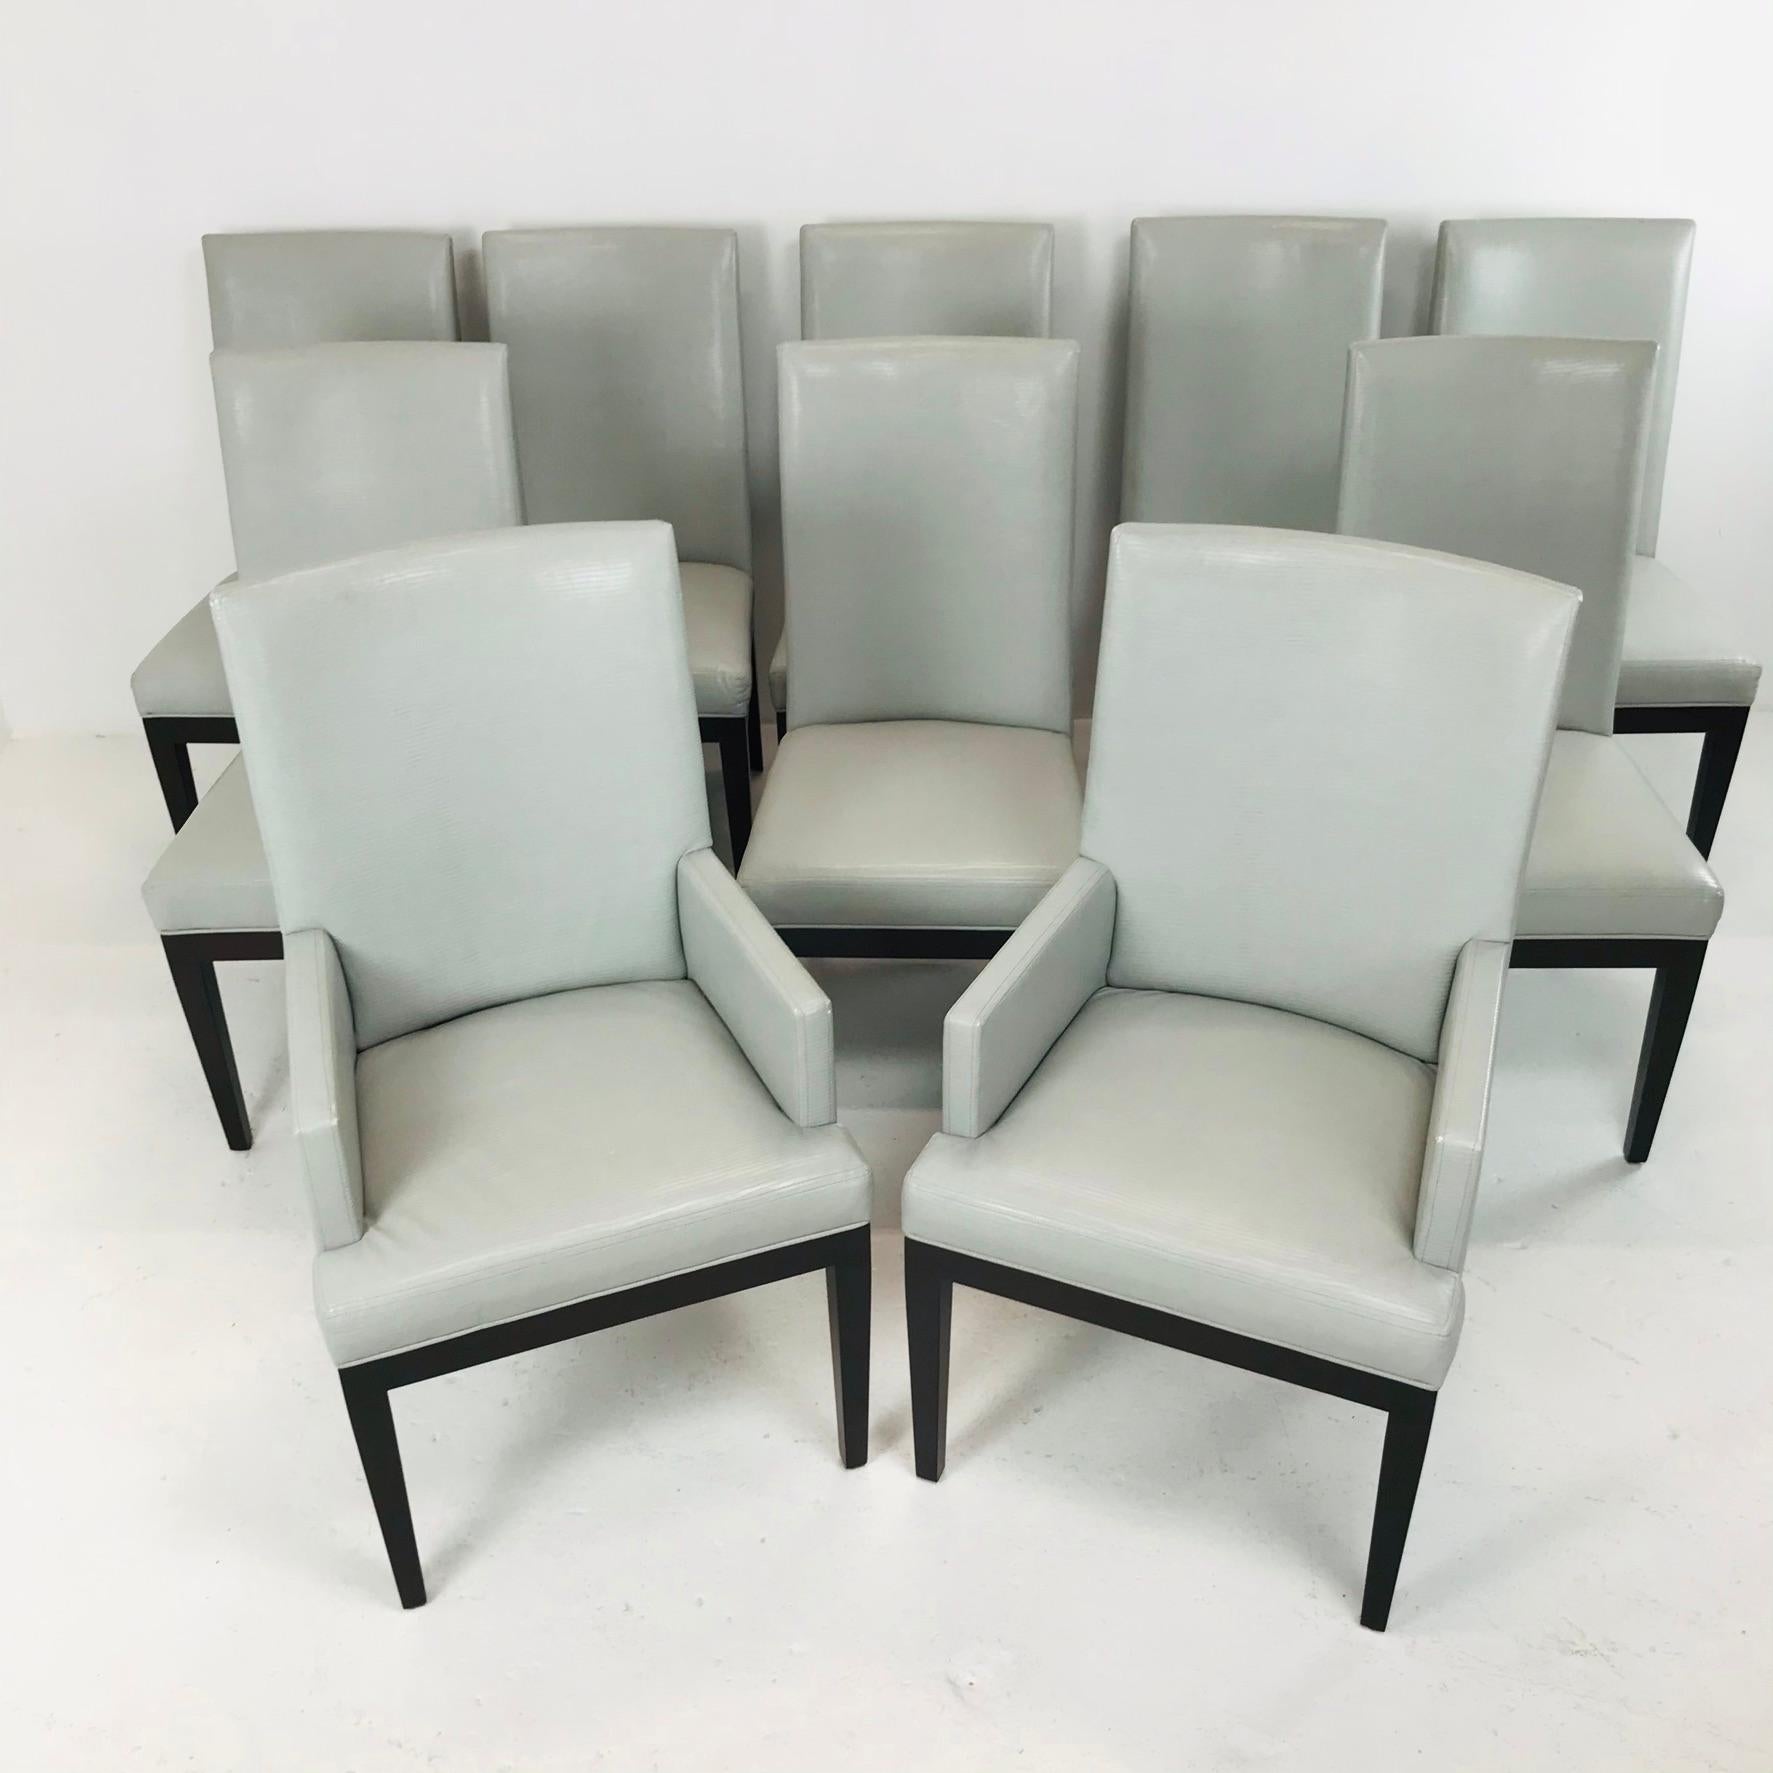 Fantastic set of 10 faux snakeskin #486 dining chairs by A. Rudin. 2 armchairs and 8 side chairs.
Armchairs measure: 23'' W x 26'' D x 41